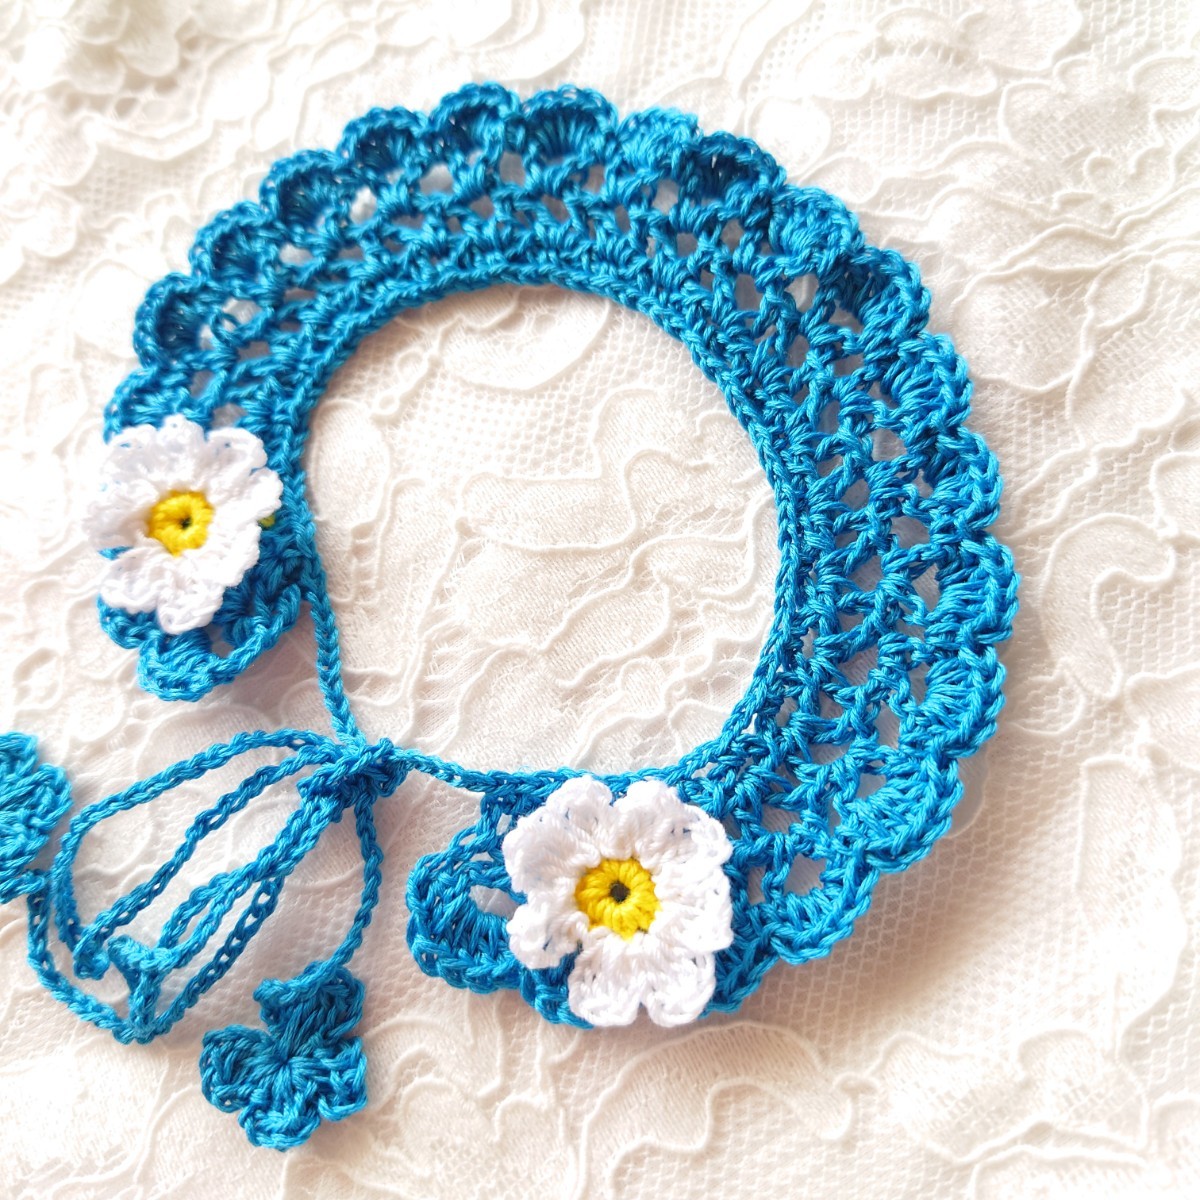  dog & cat necklace neck decoration attaching collar choker XS size light blue small flower hand-knitted hand made key needle braided lace thread 